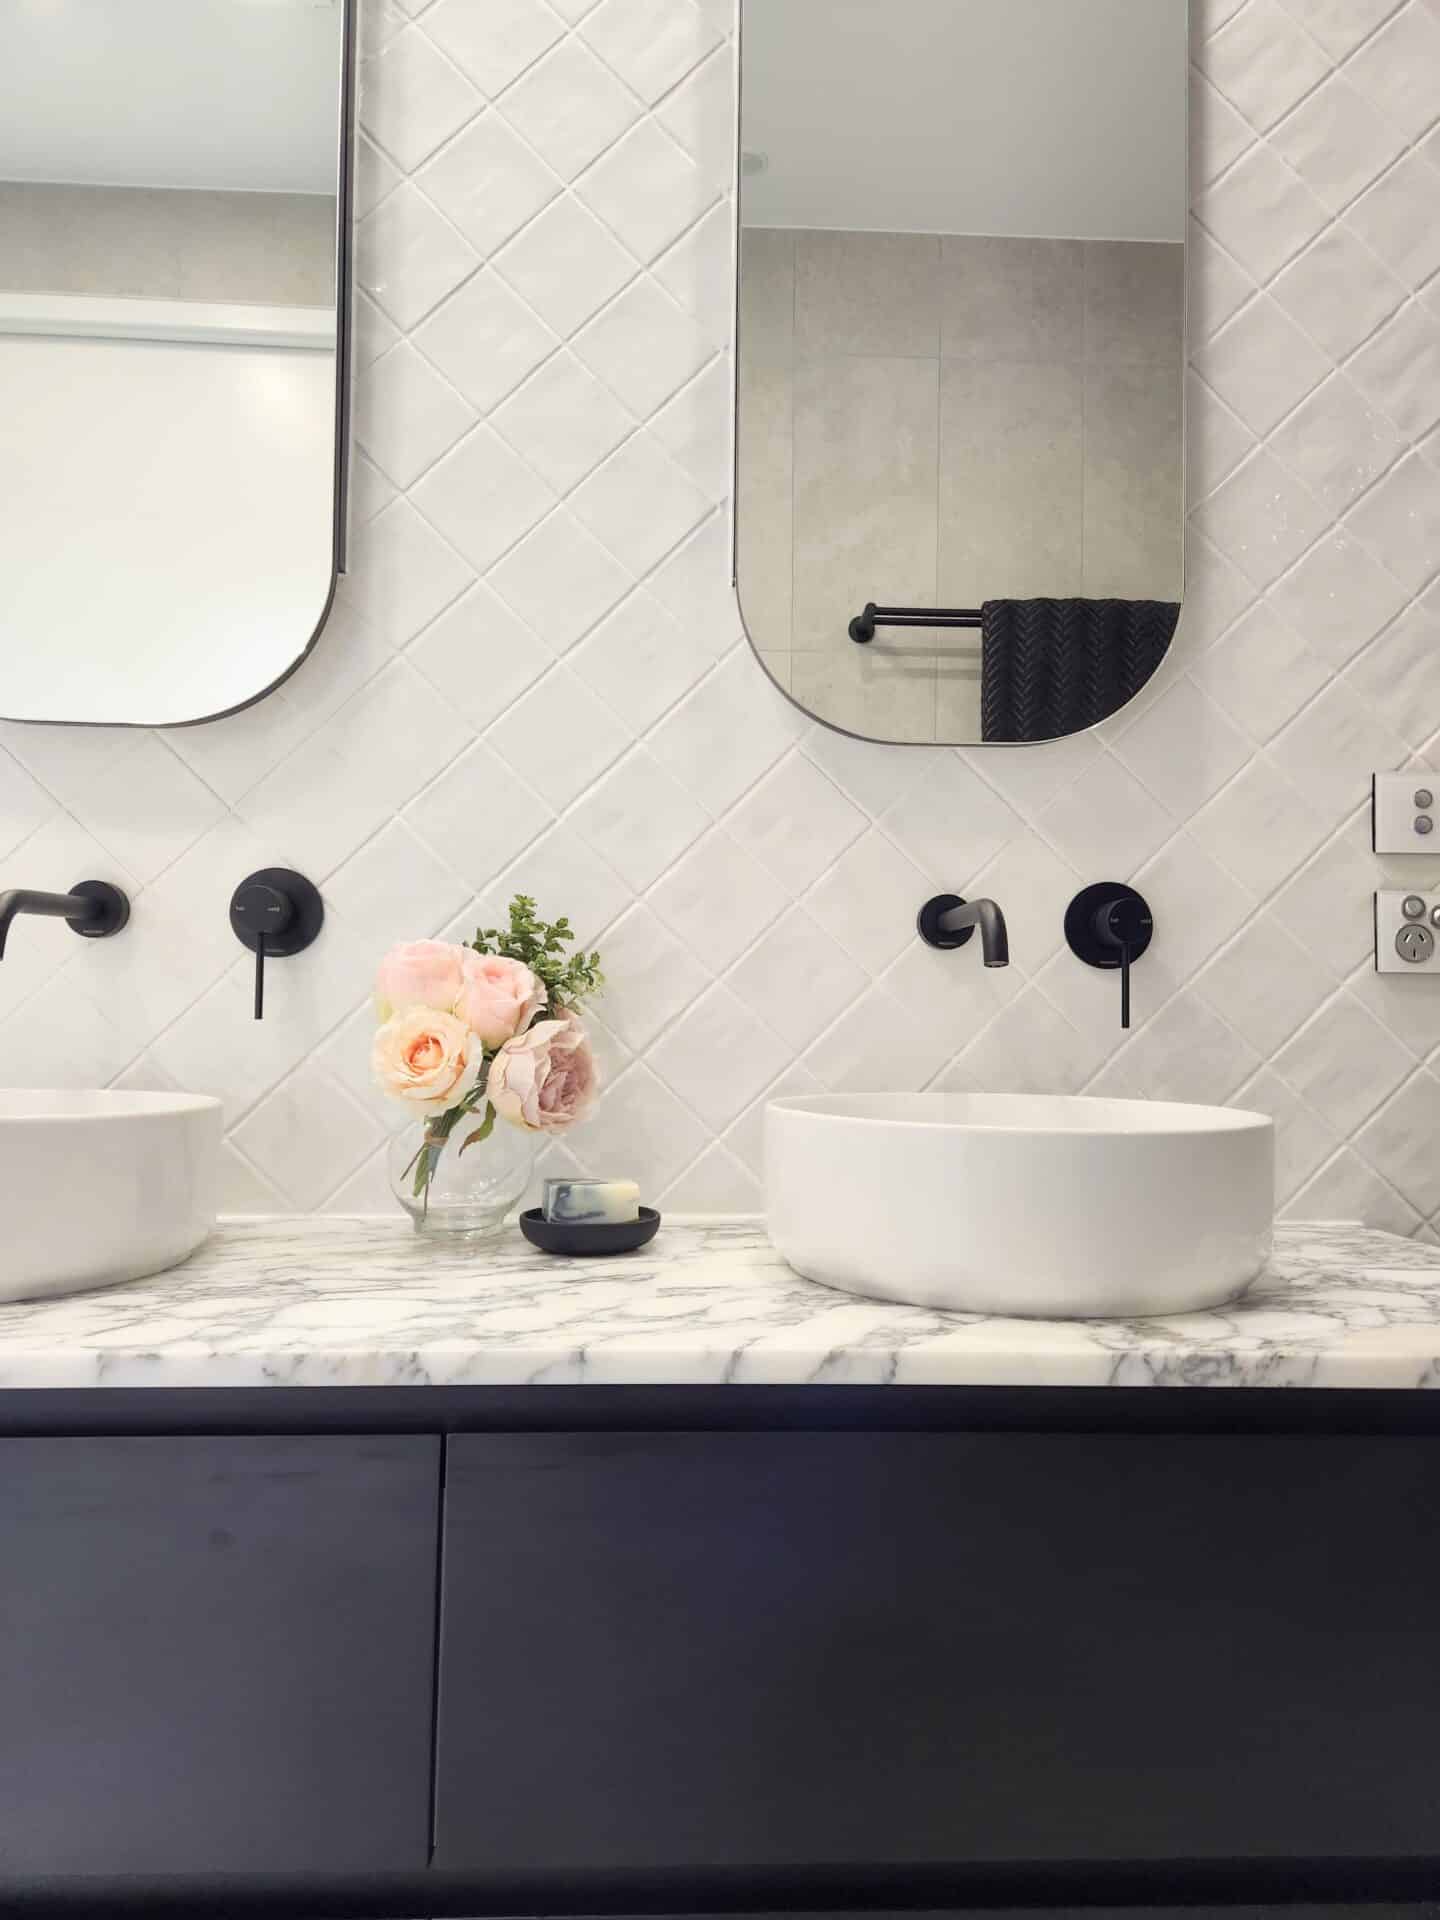 A bathroom with a marble counter top and two sinks.